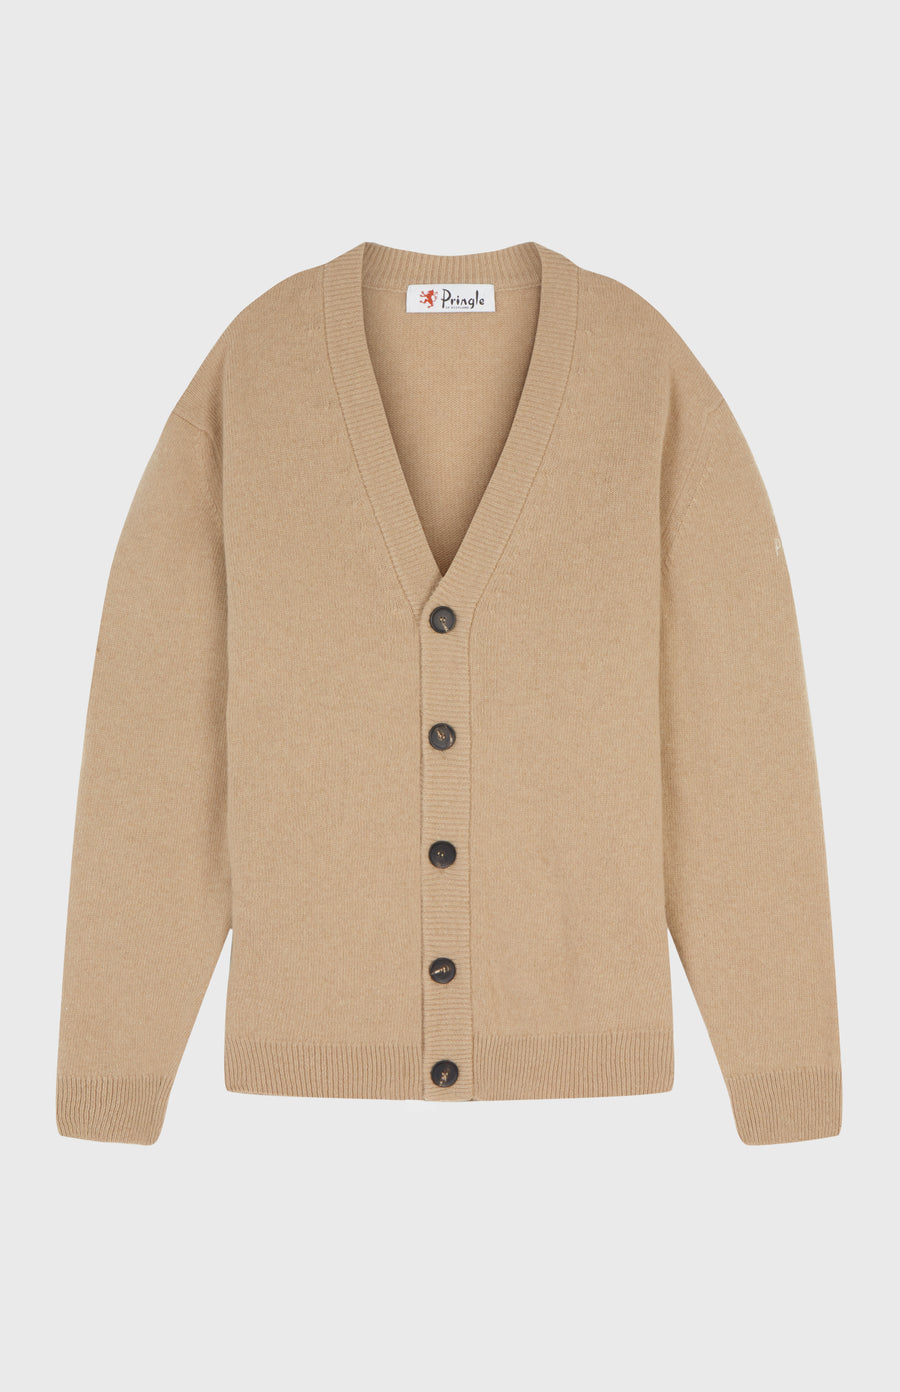 Pringle of Scotland Women's Archive Lambswool Blend Cardigan in Camel